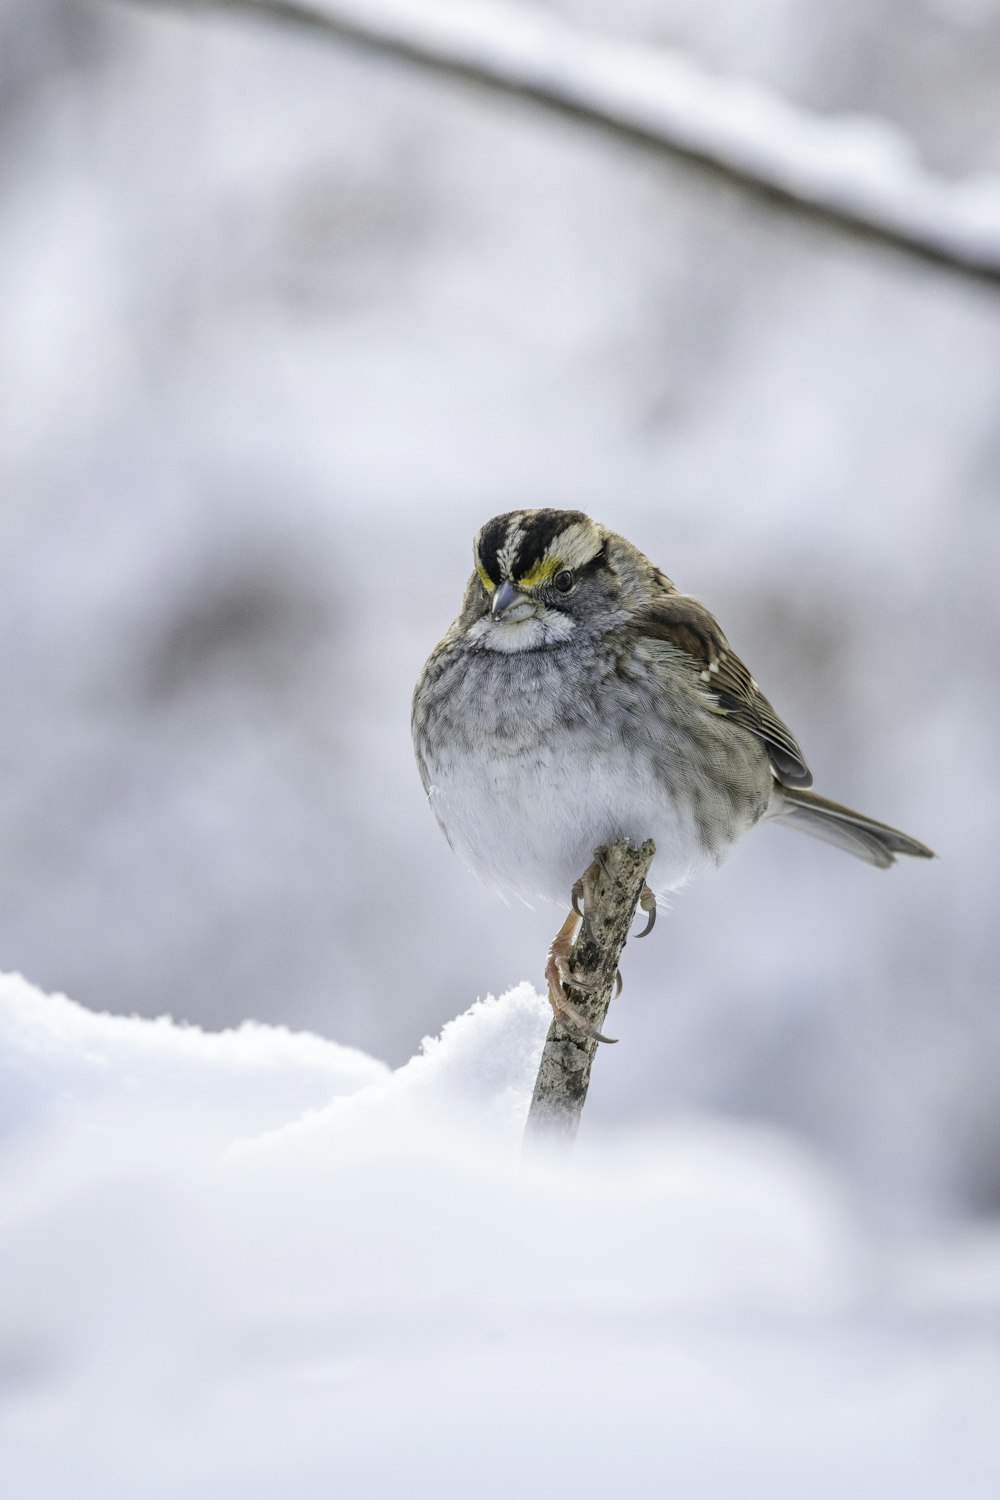 a small bird perched on a branch in the snow